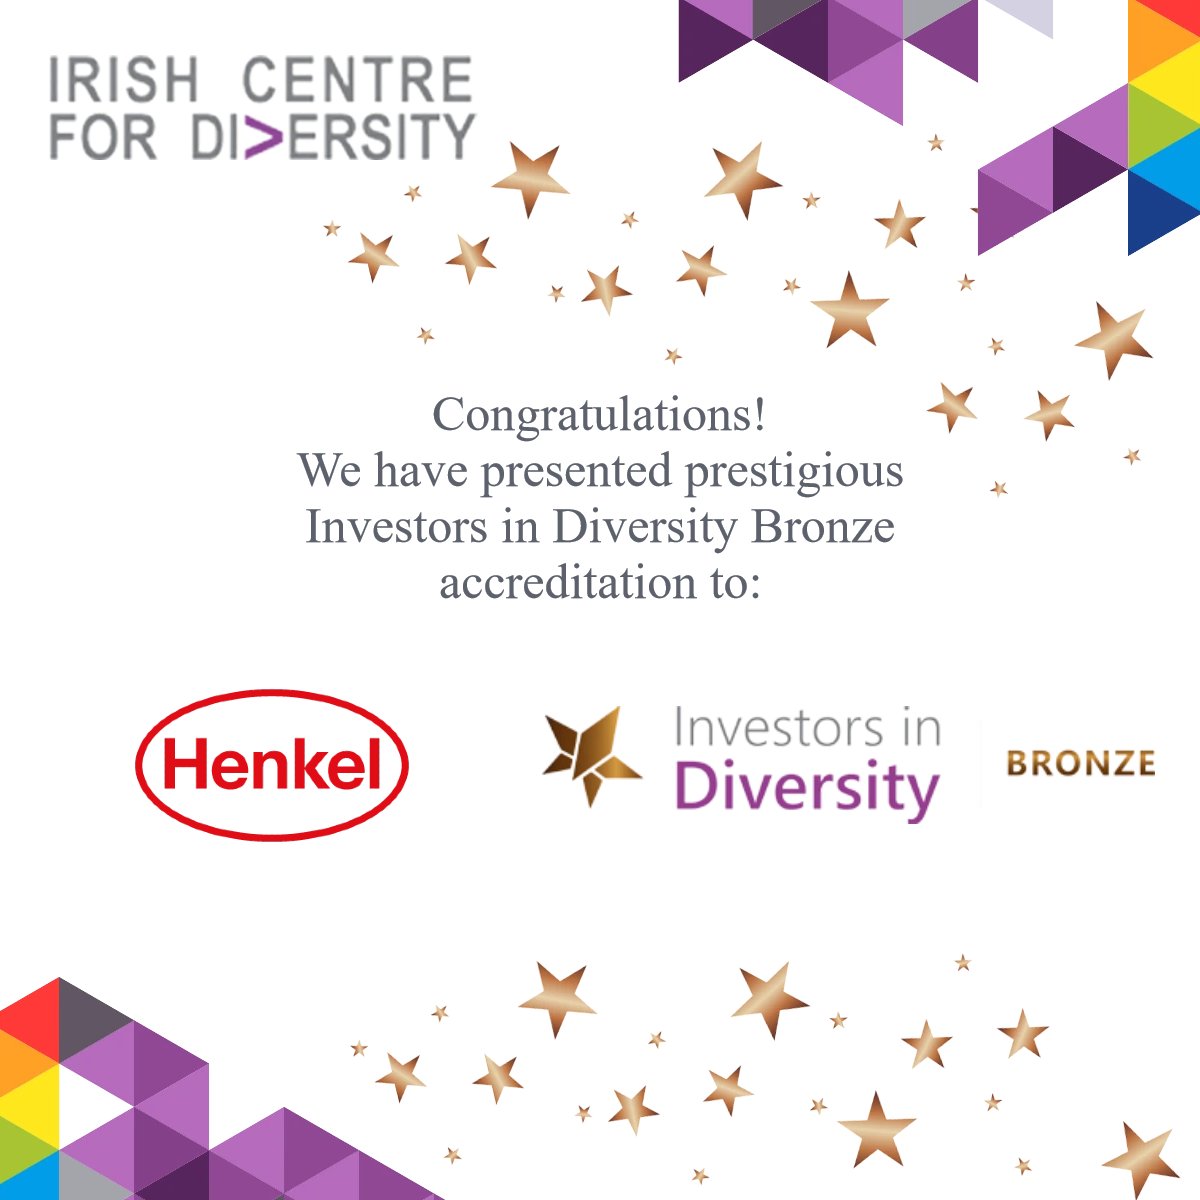 Congrats! @Henkel Ireland has attained #InvestorsinDiversity Bronze, Ireland’s premier D&I accreditation. Henkel holds leading market positions worldwide in the industrial and consumer businesses. We look forward to sharing their further progress #CelebrateDiversity